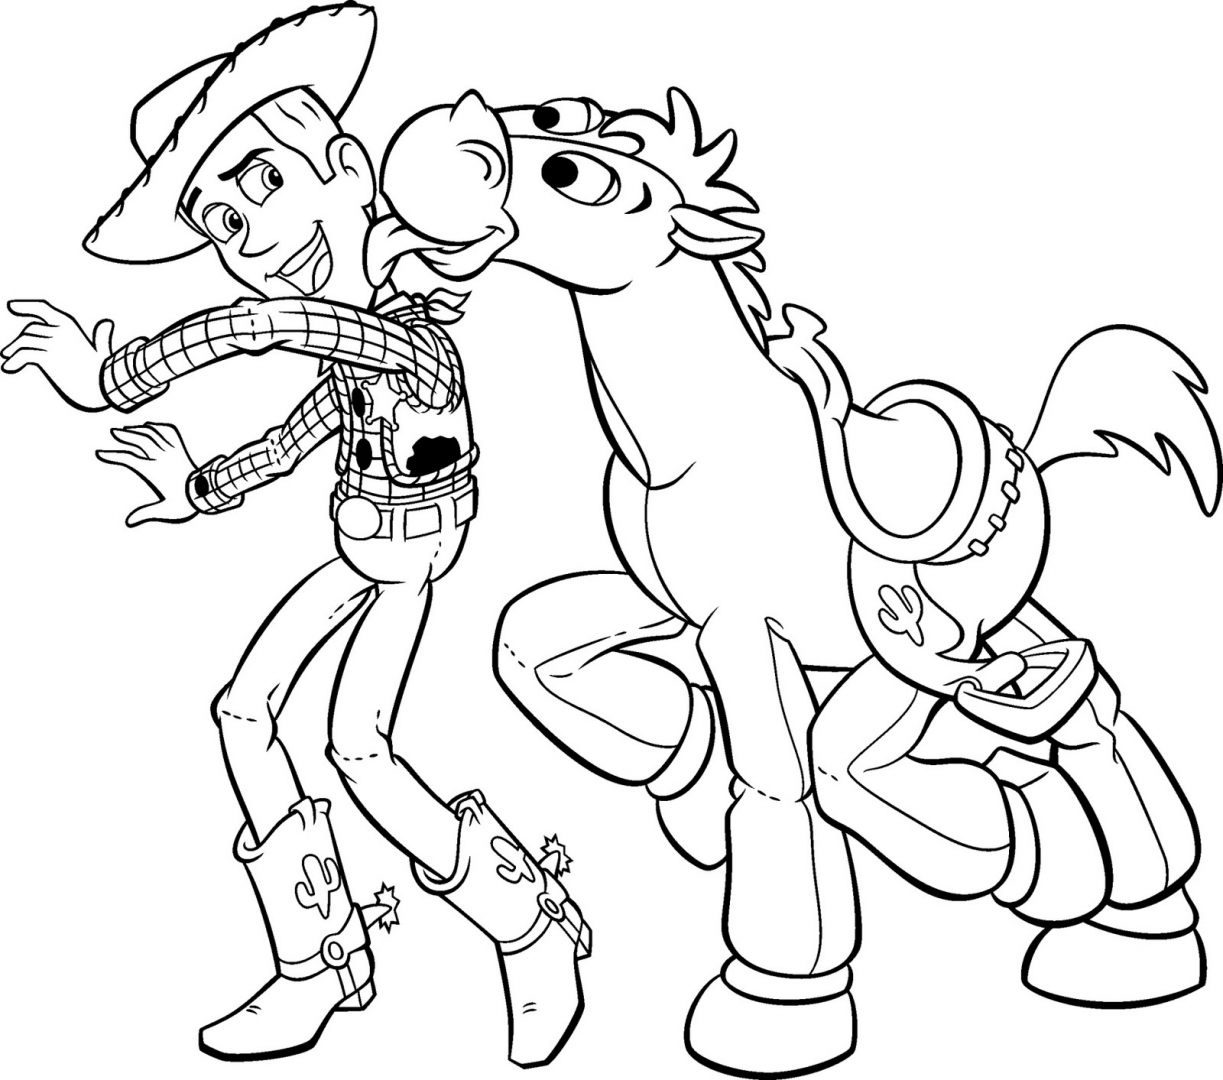 woody toy story para colorear dibujos sin colorear dibujos de woody de toy story para para colorear story woody toy 